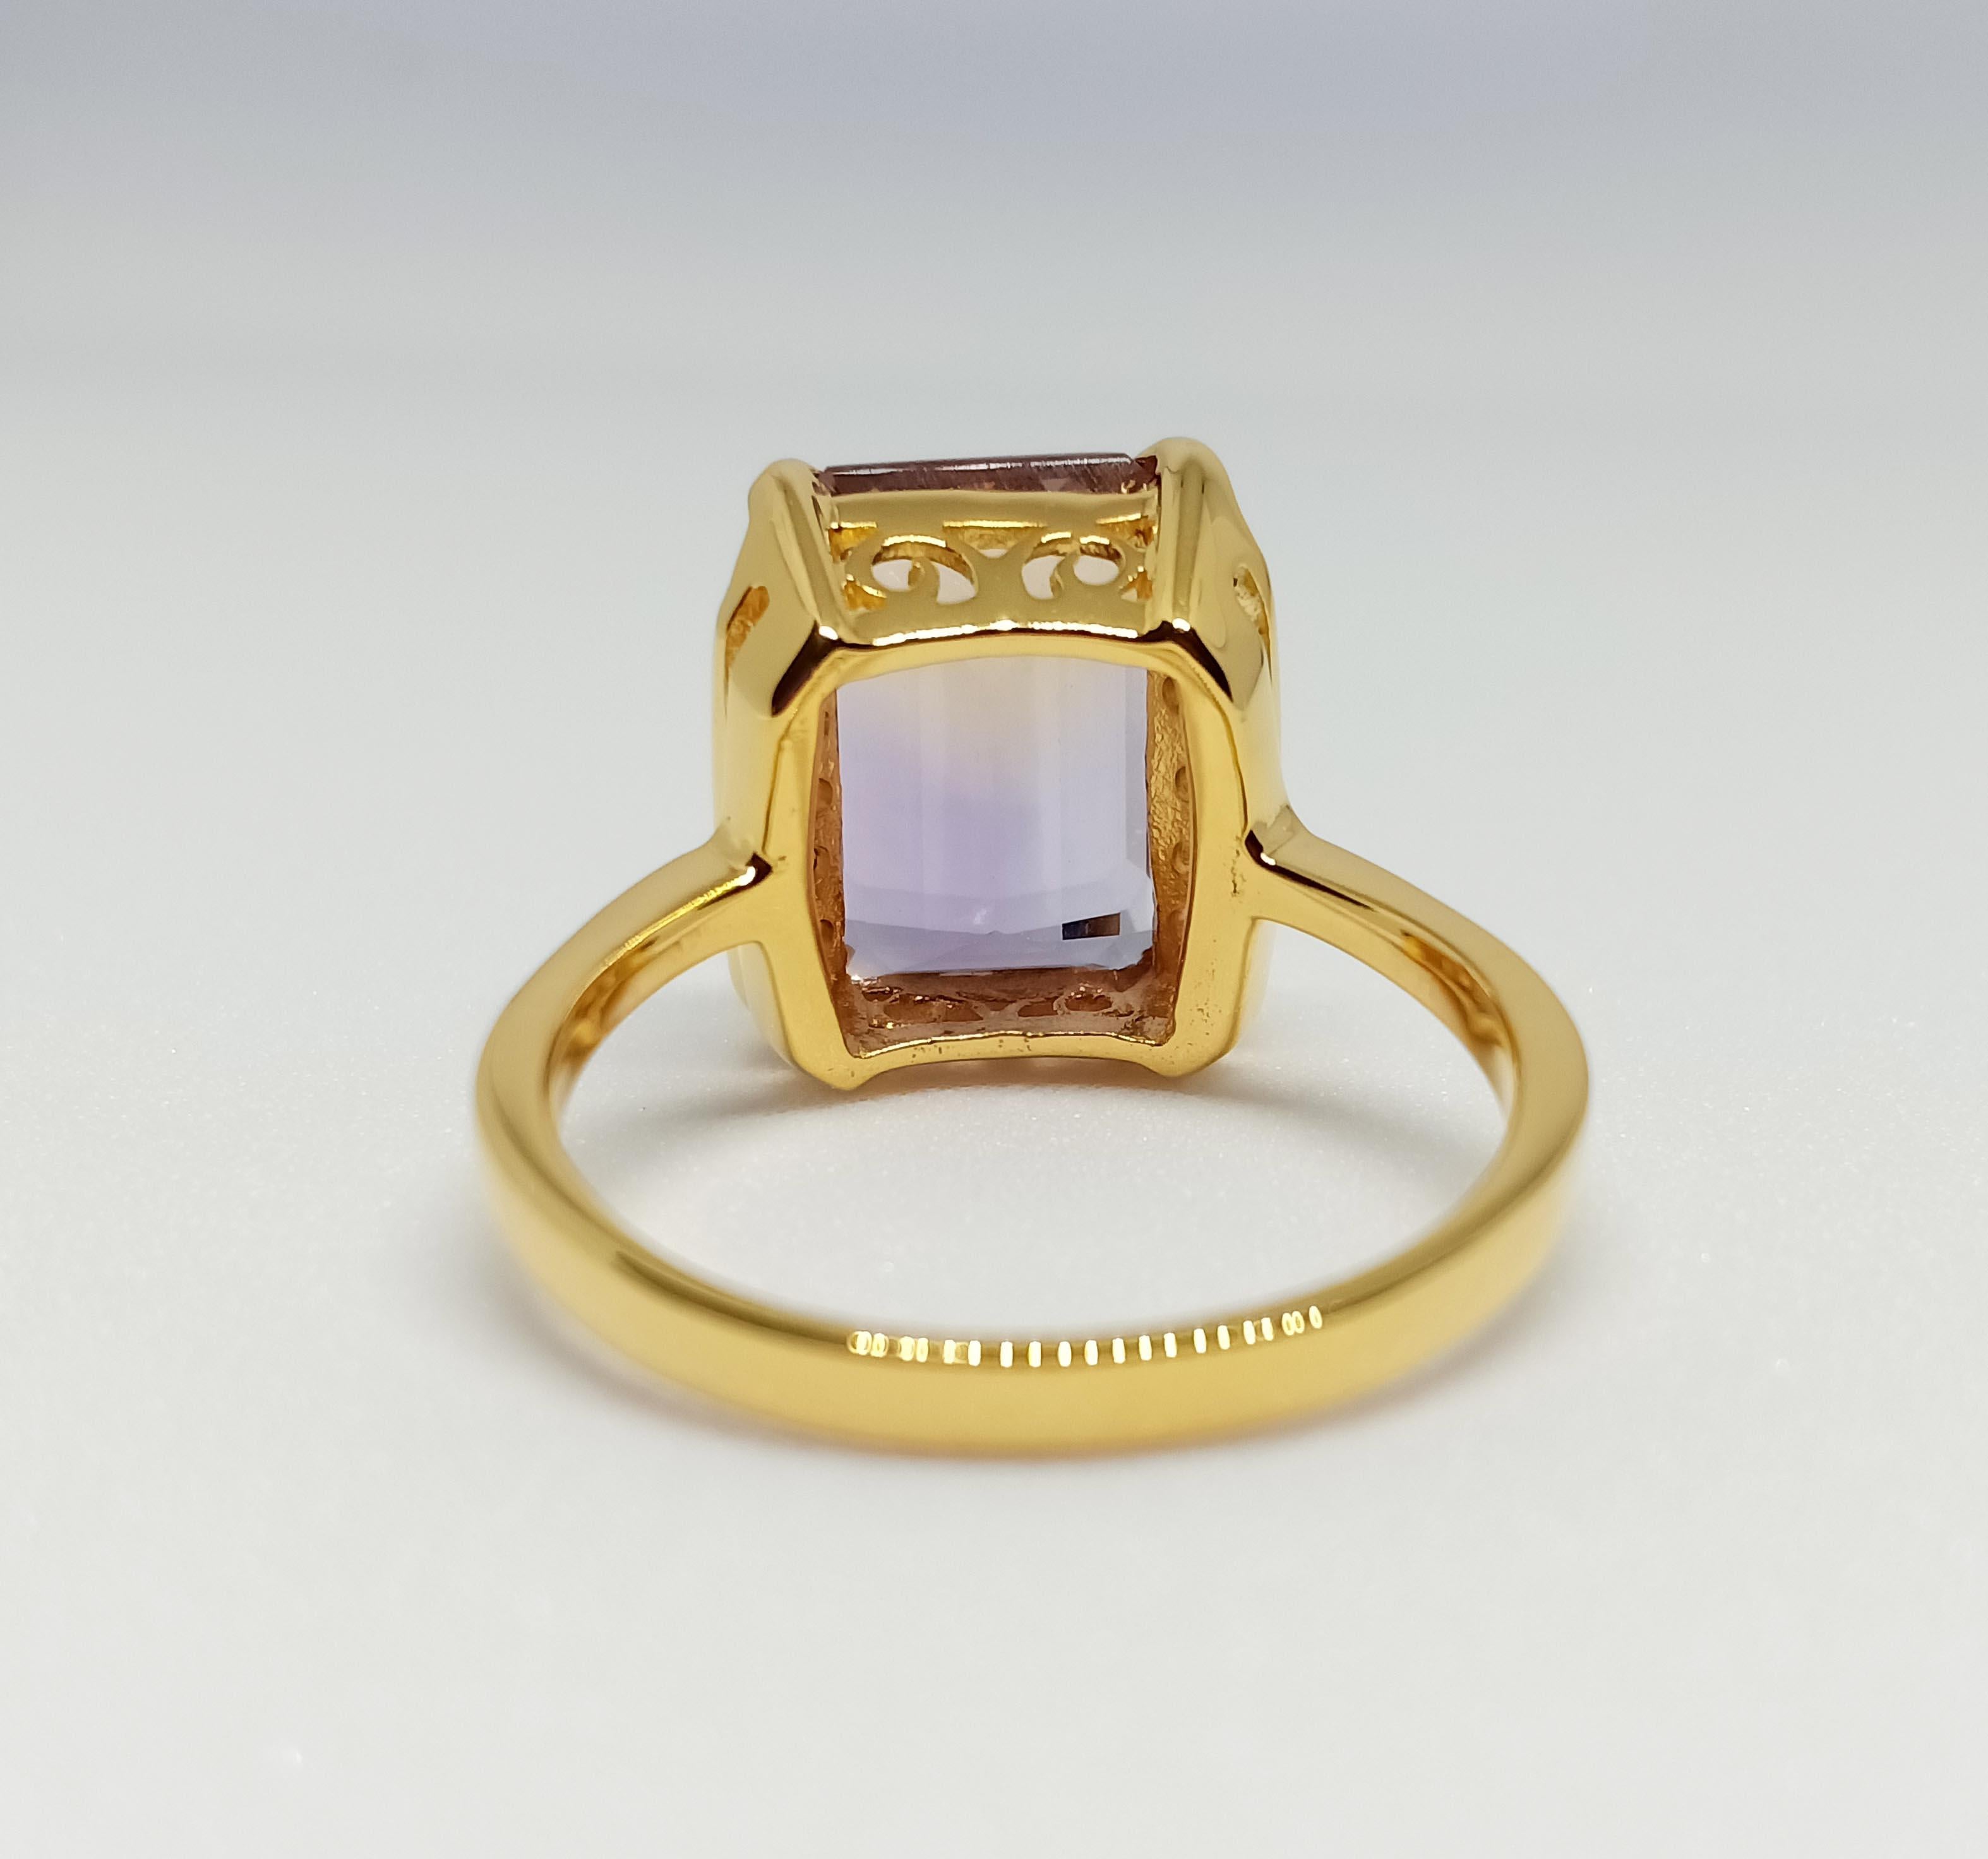 Emerald Cut Ametrine Ring 4.50ct , white zircon 18K gold plated on over sterling silver For Sale